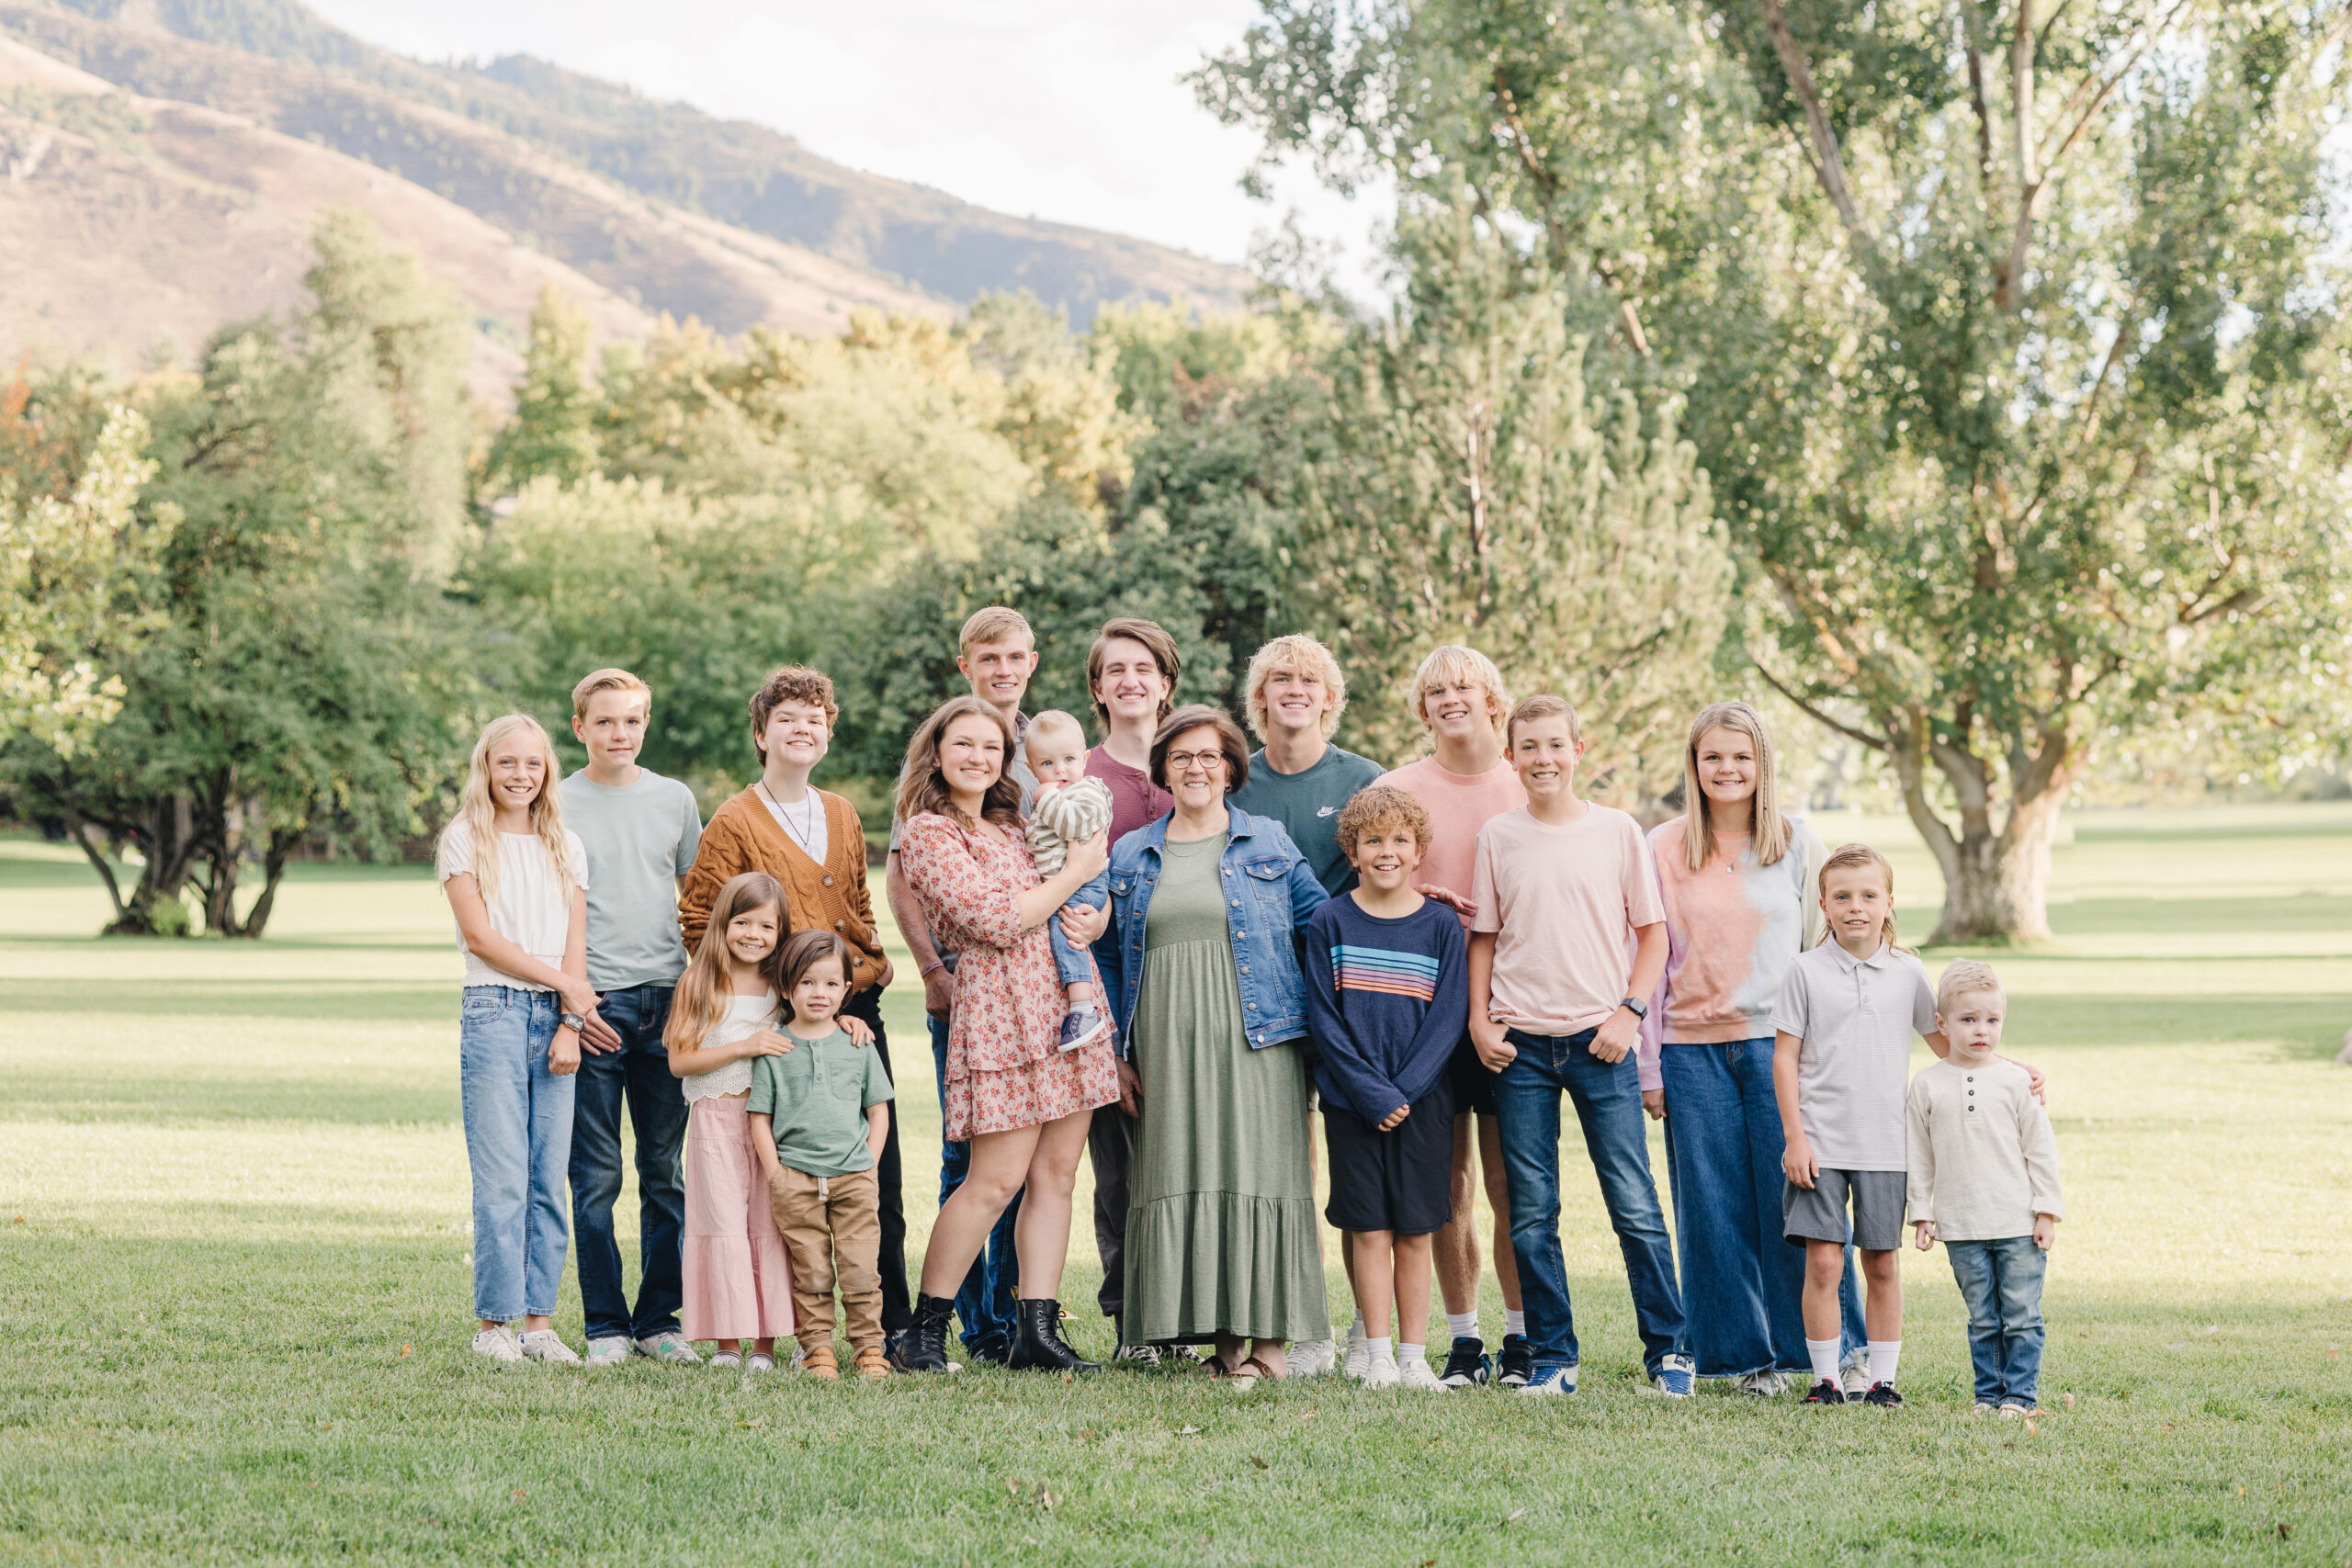 Coordinating Colors for Extended Family Pictures